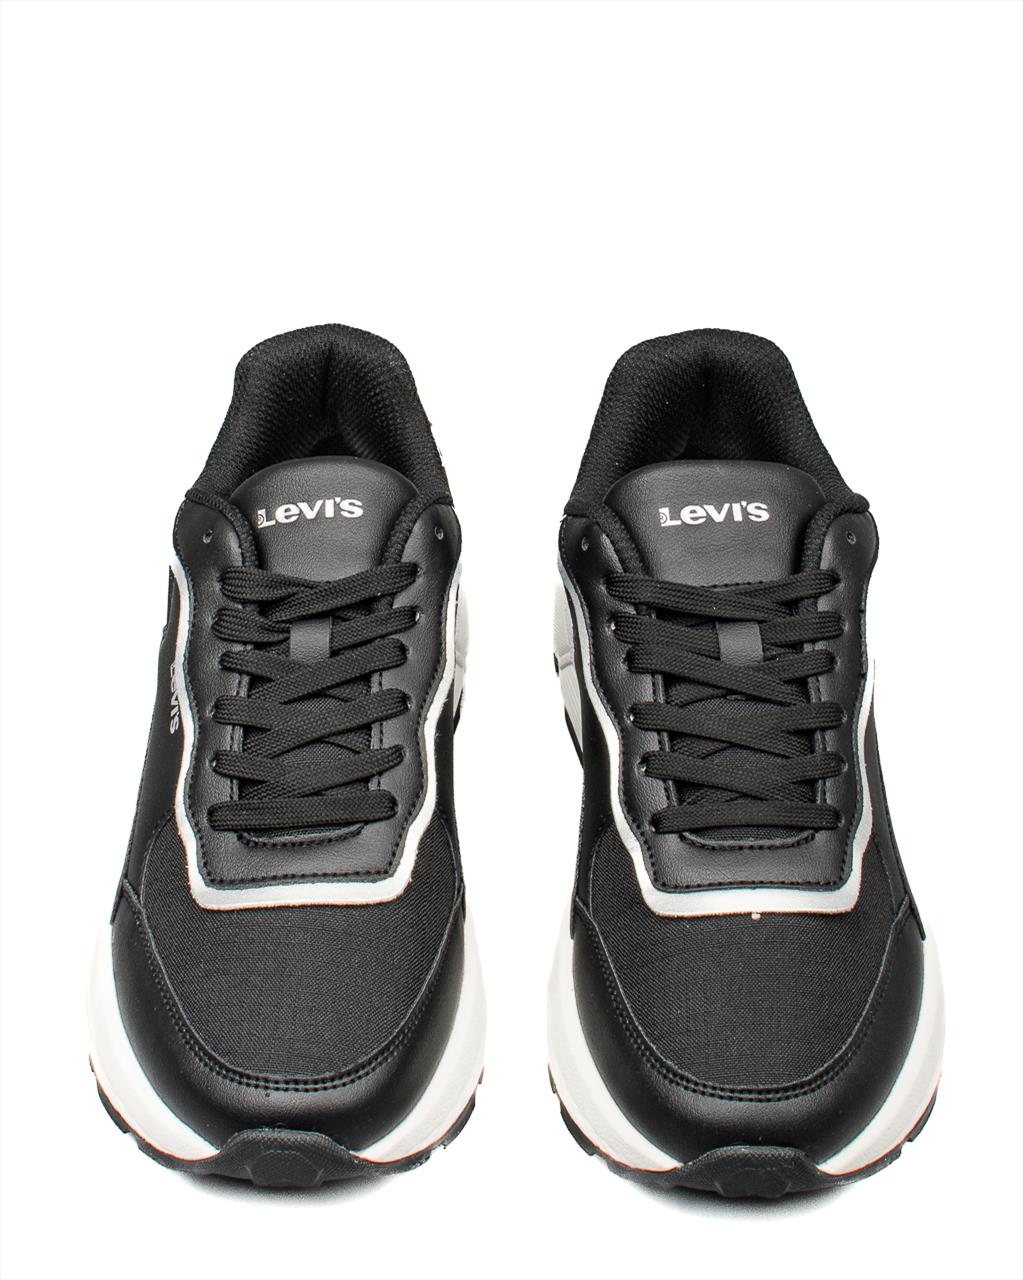 LEVI's TAPPED SNEAKERS IN BLACK